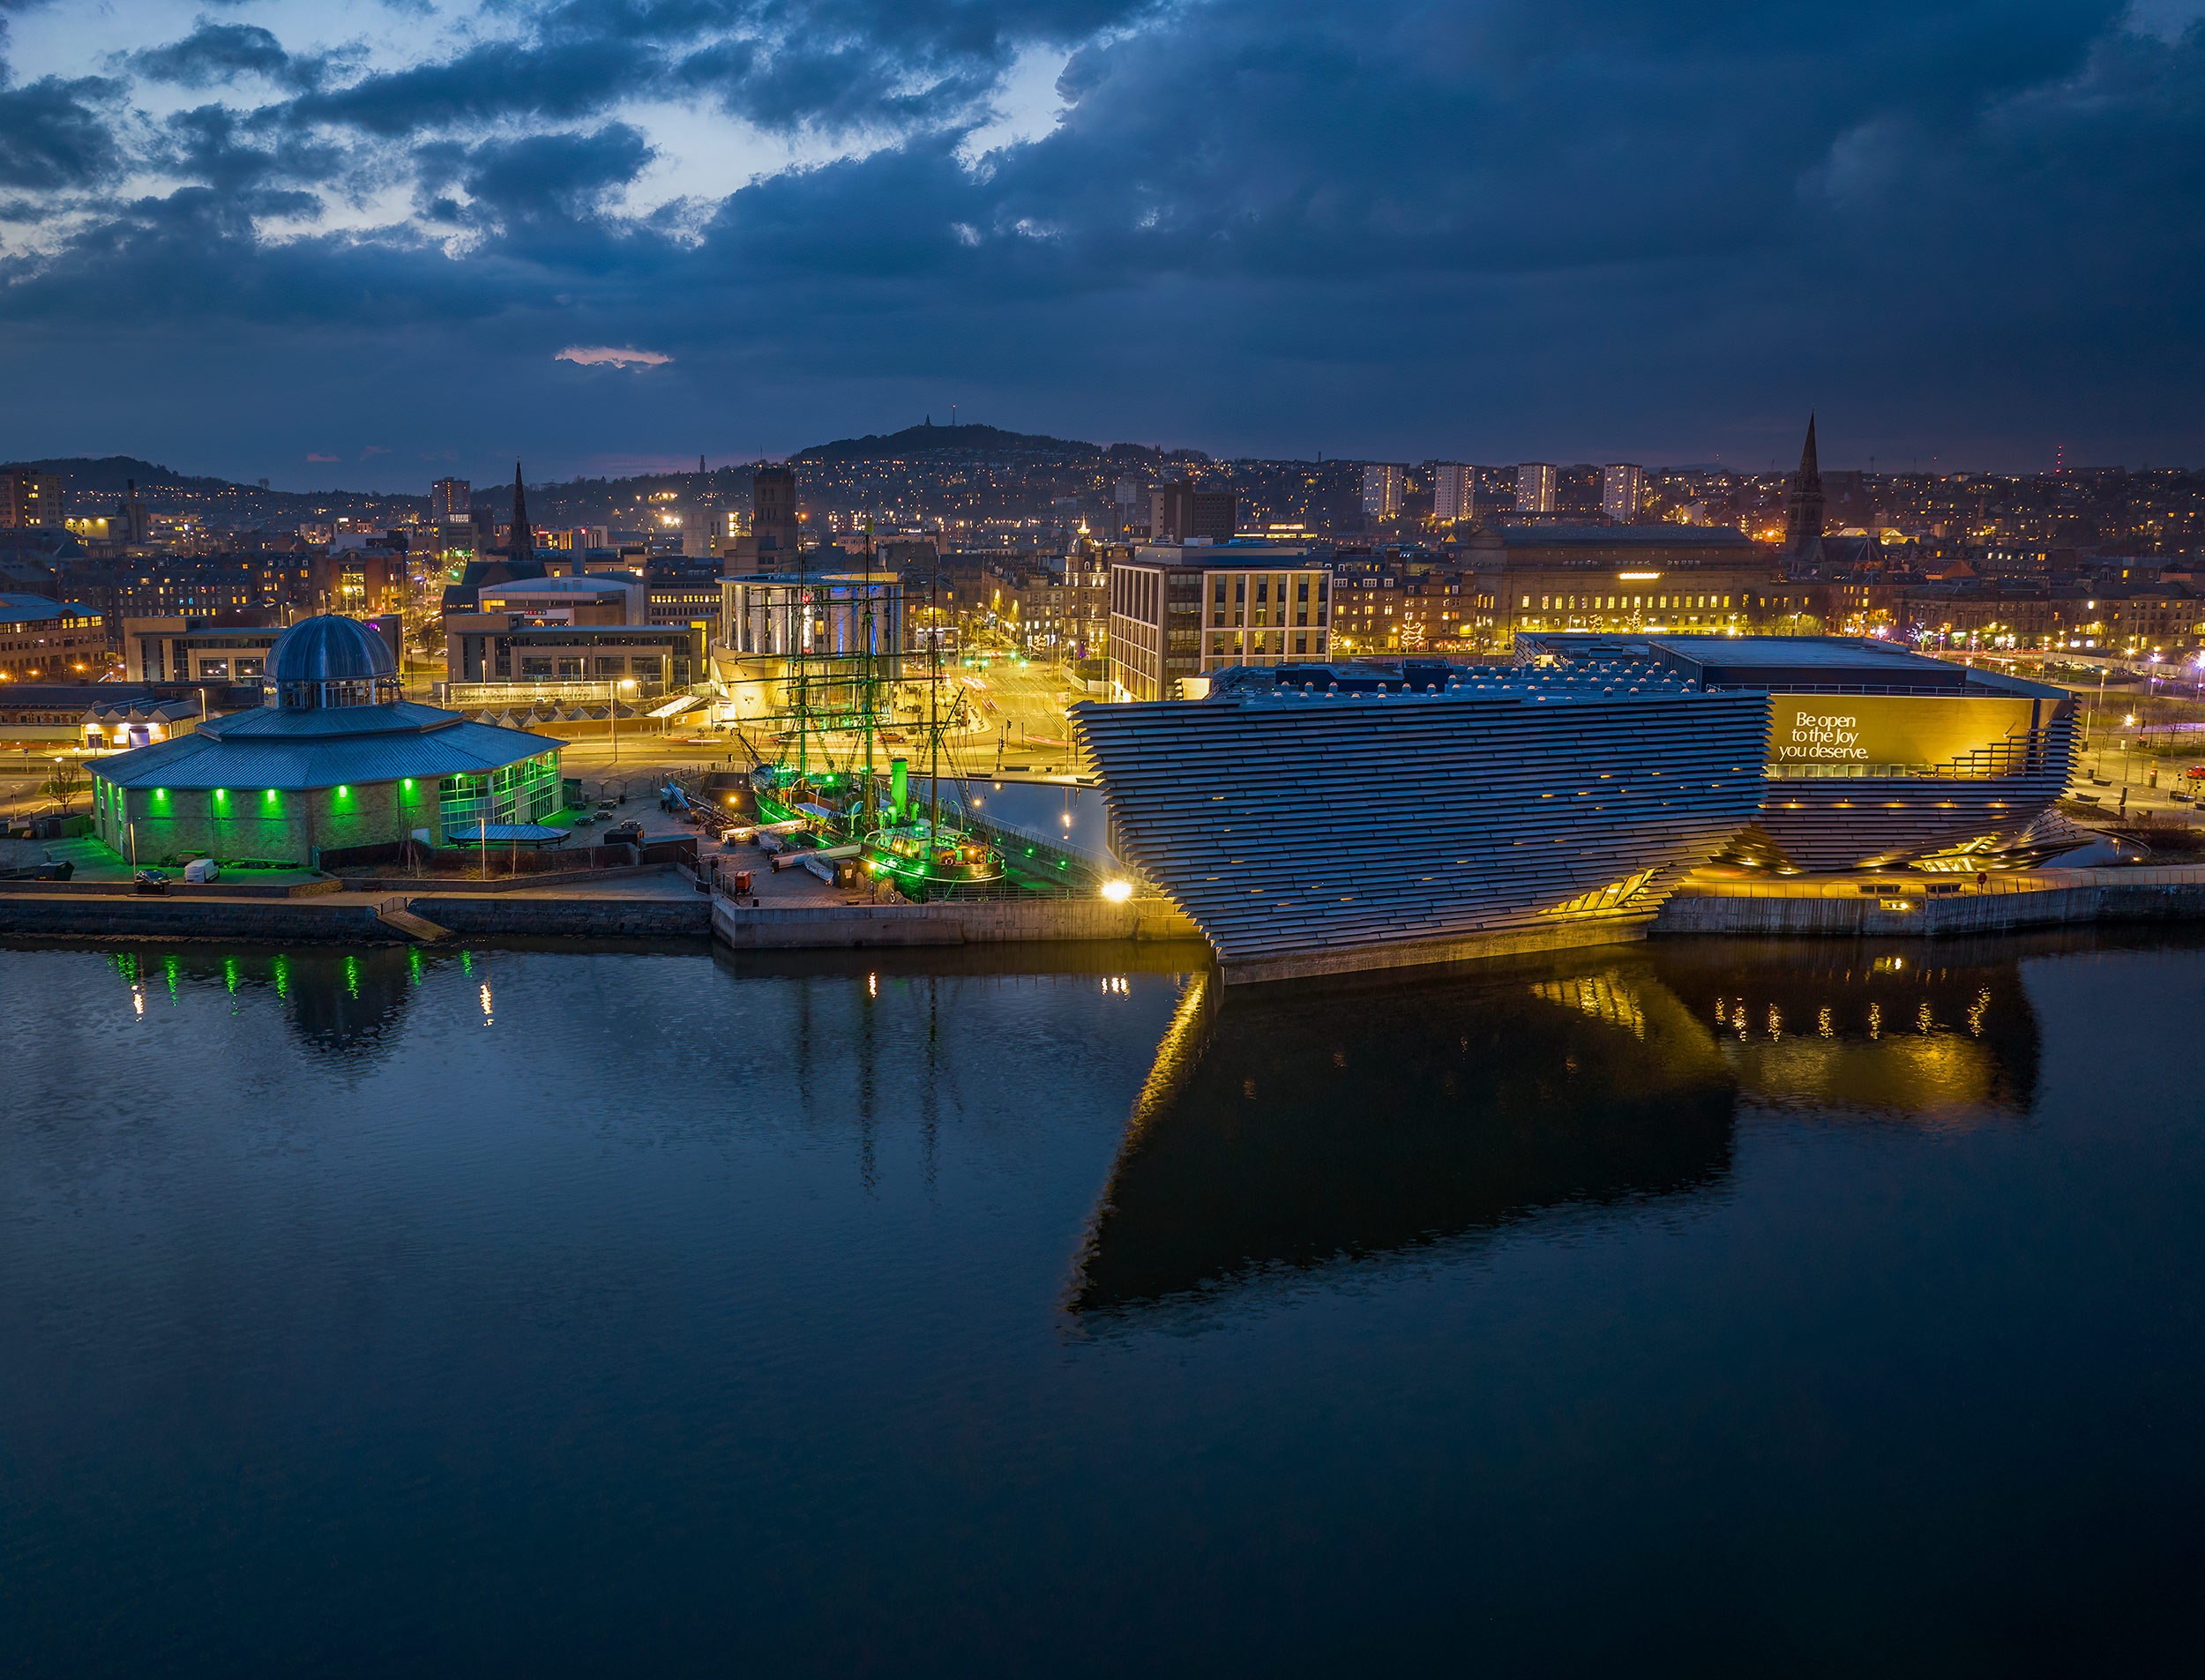 V&A at night over the River Tay